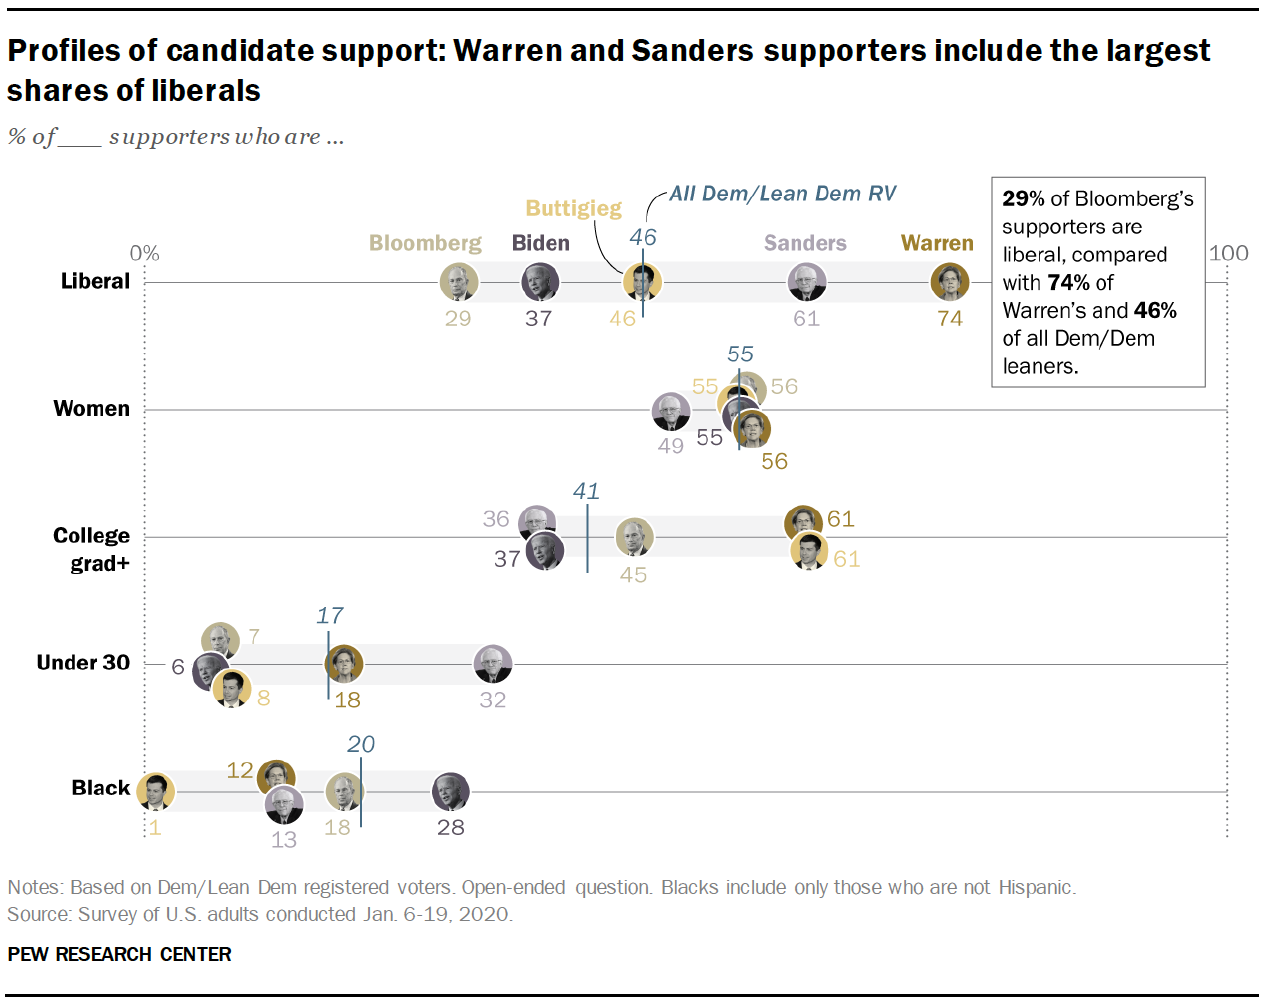 Profiles of candidate support: Warren and Sanders supporters include the largest shares of liberals